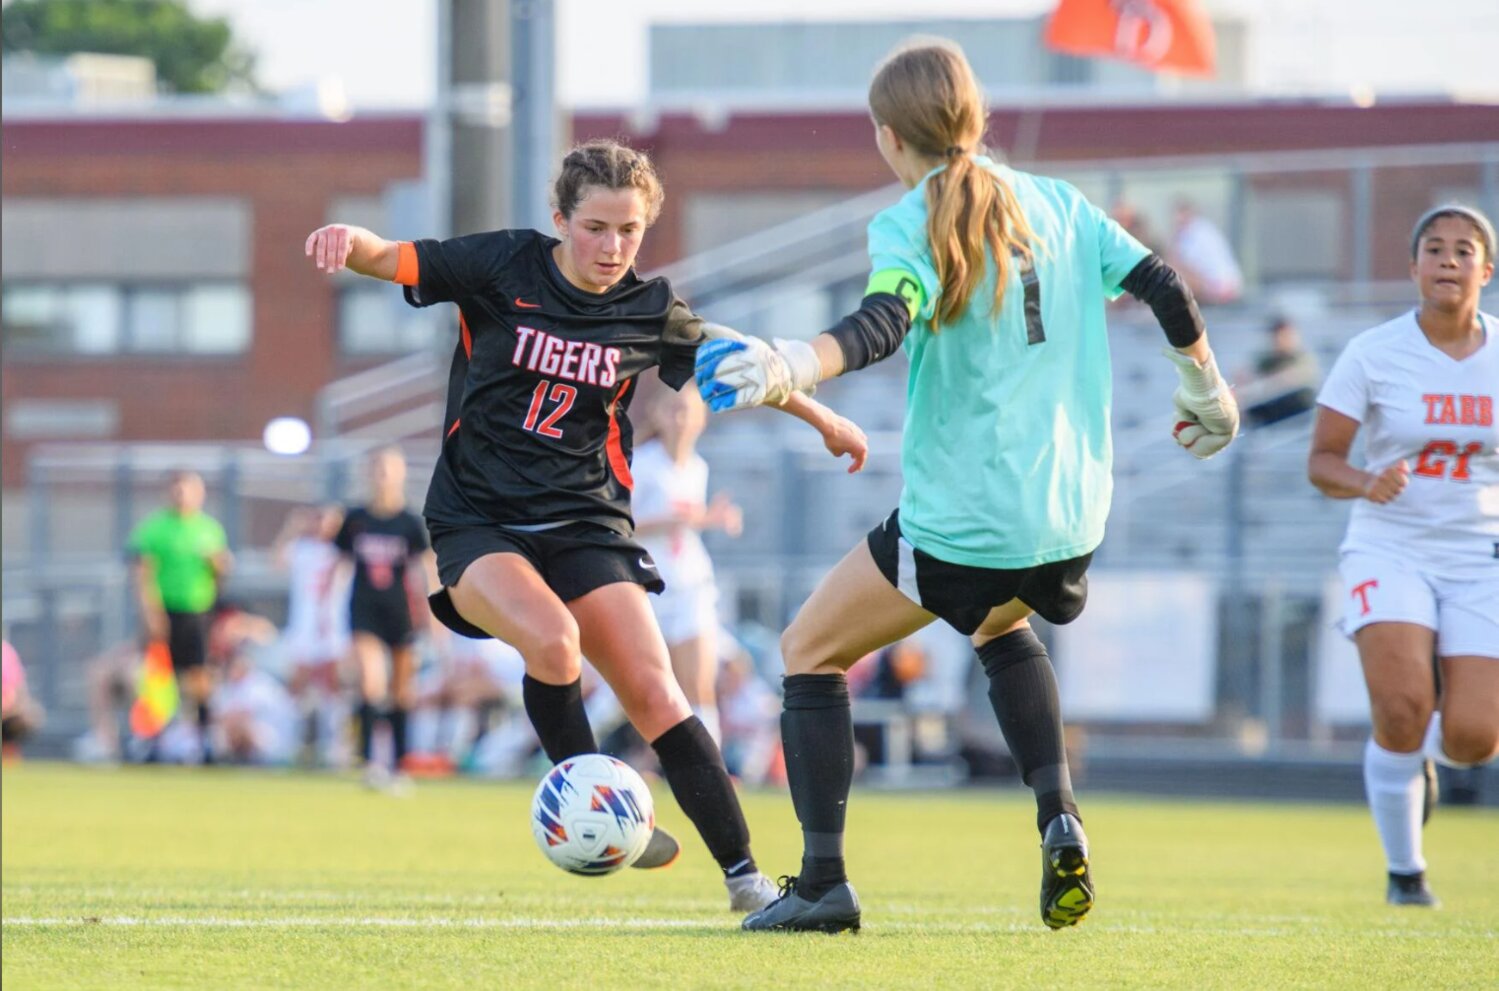 Brentsville’s Peyton McGovern with a one-on-one against Tabb’s goalie during the state quarterfinals.